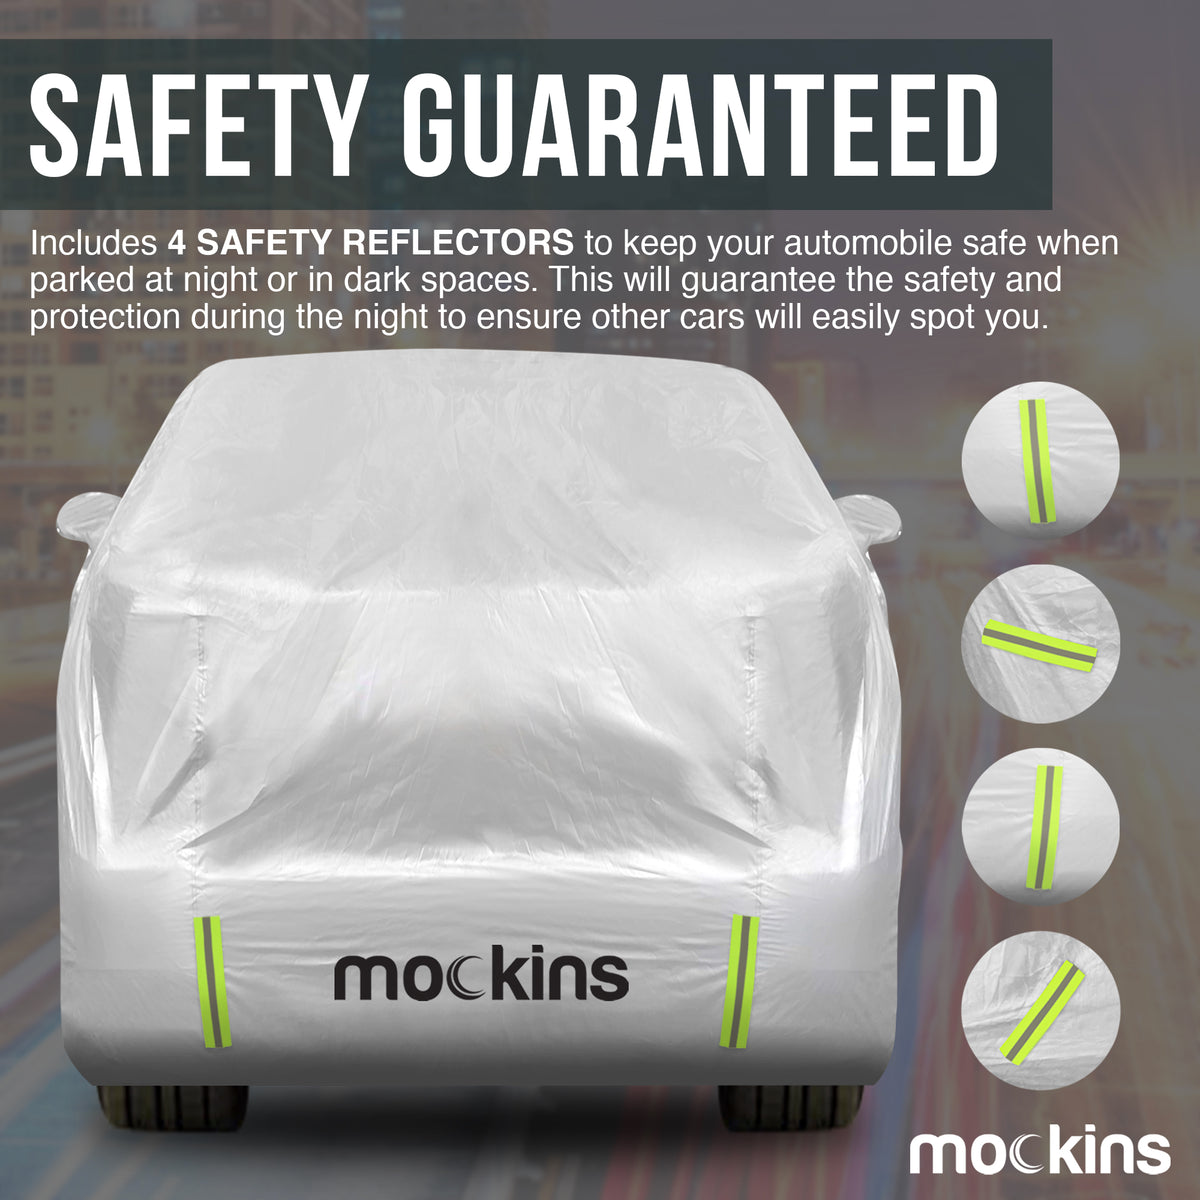 Mockins SUV Cover Includes 4 Safety Reflectors To Keep Your Automobile Safe When Parked At Night